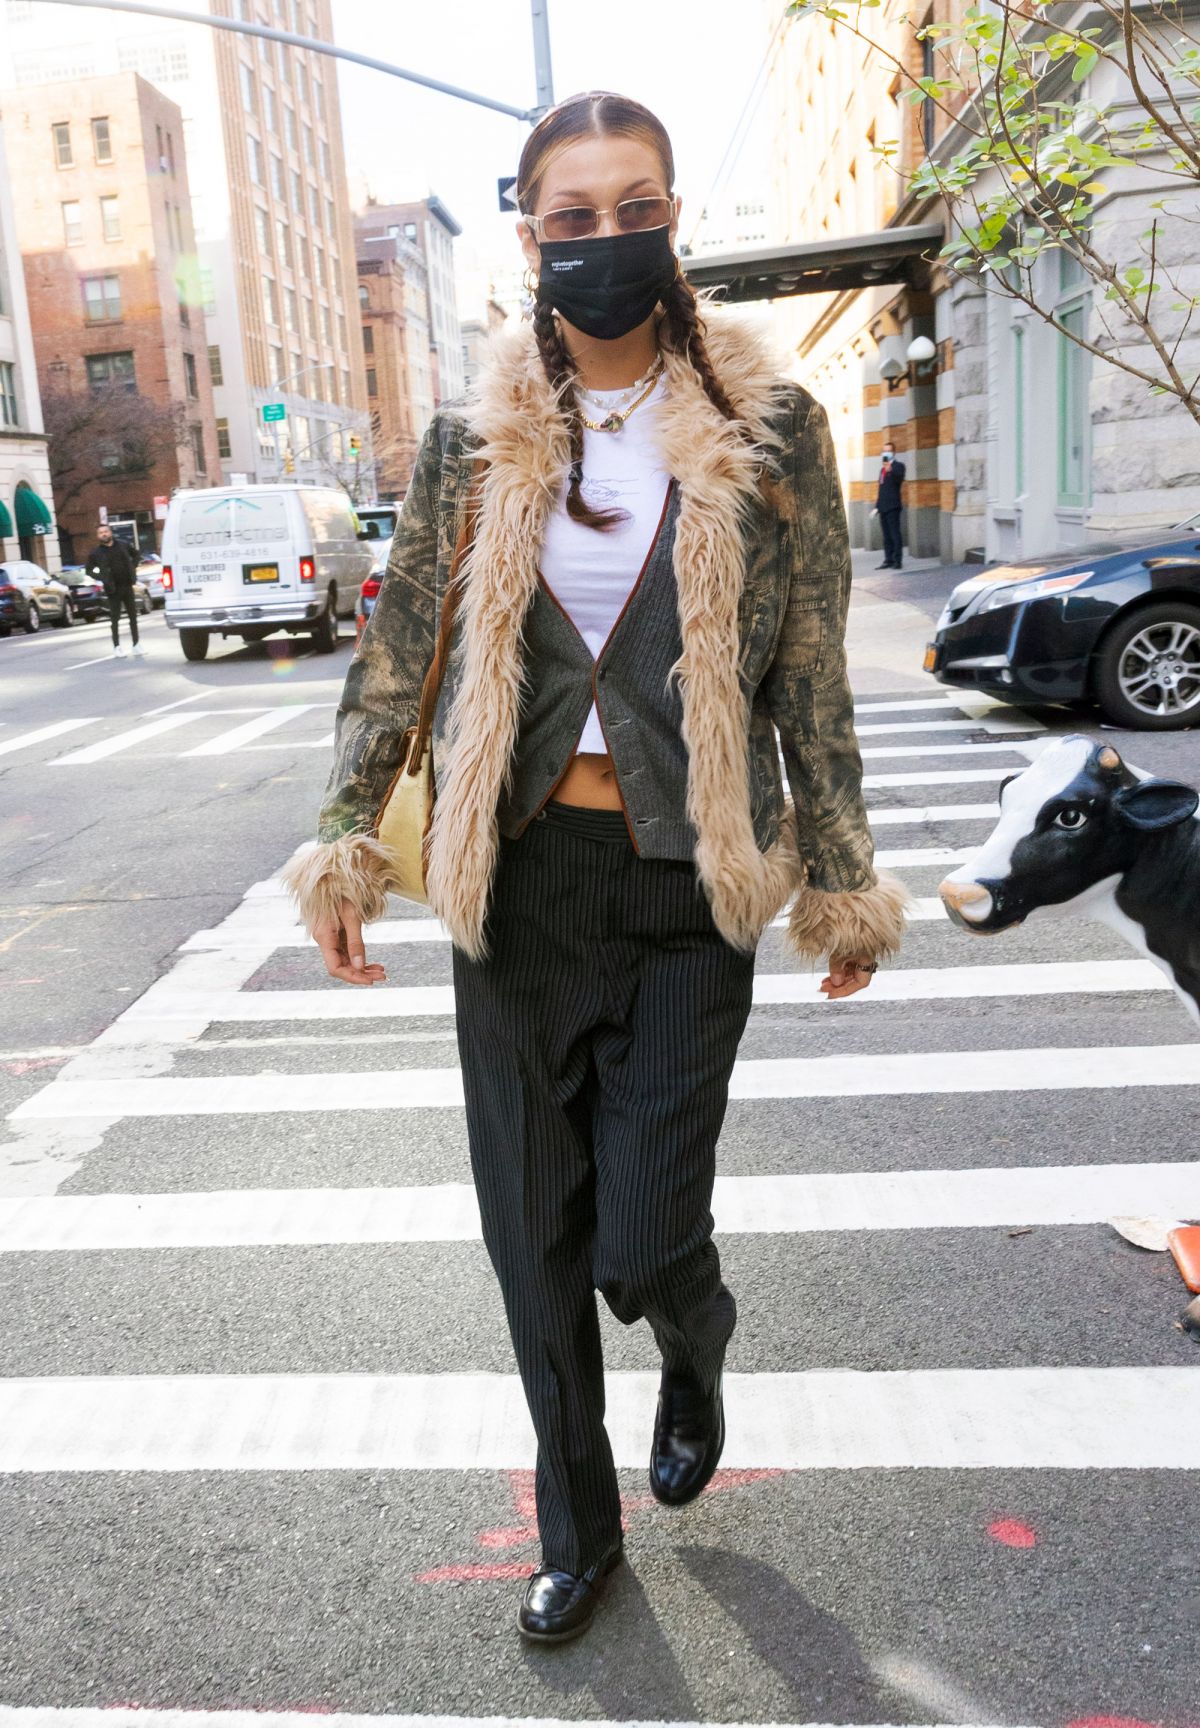 bella-hadid-out-and-about-in-new-york-11-19-2020-3.jpg